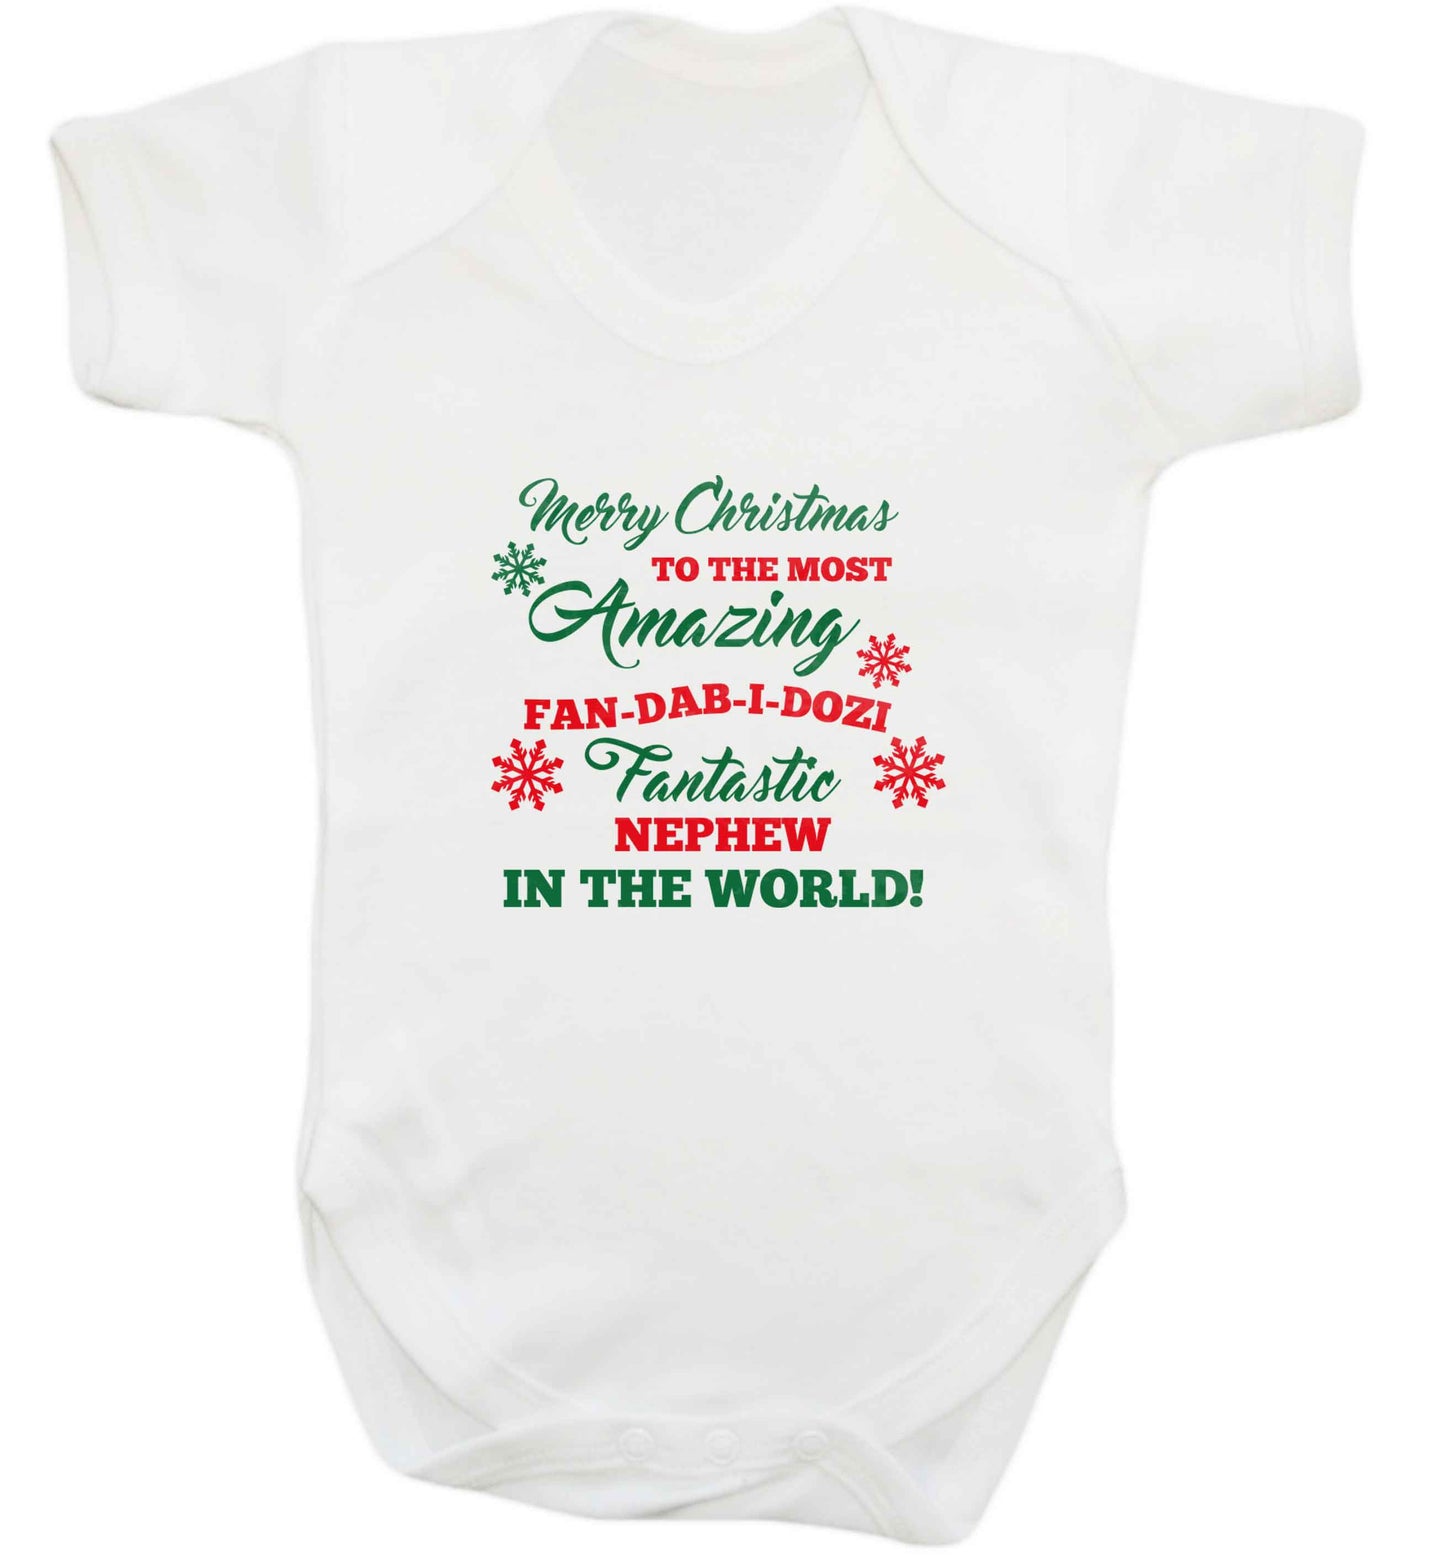 Merry Christmas to the most amazing fan-dab-i-dozi fantasic Nephew in the world baby vest white 18-24 months